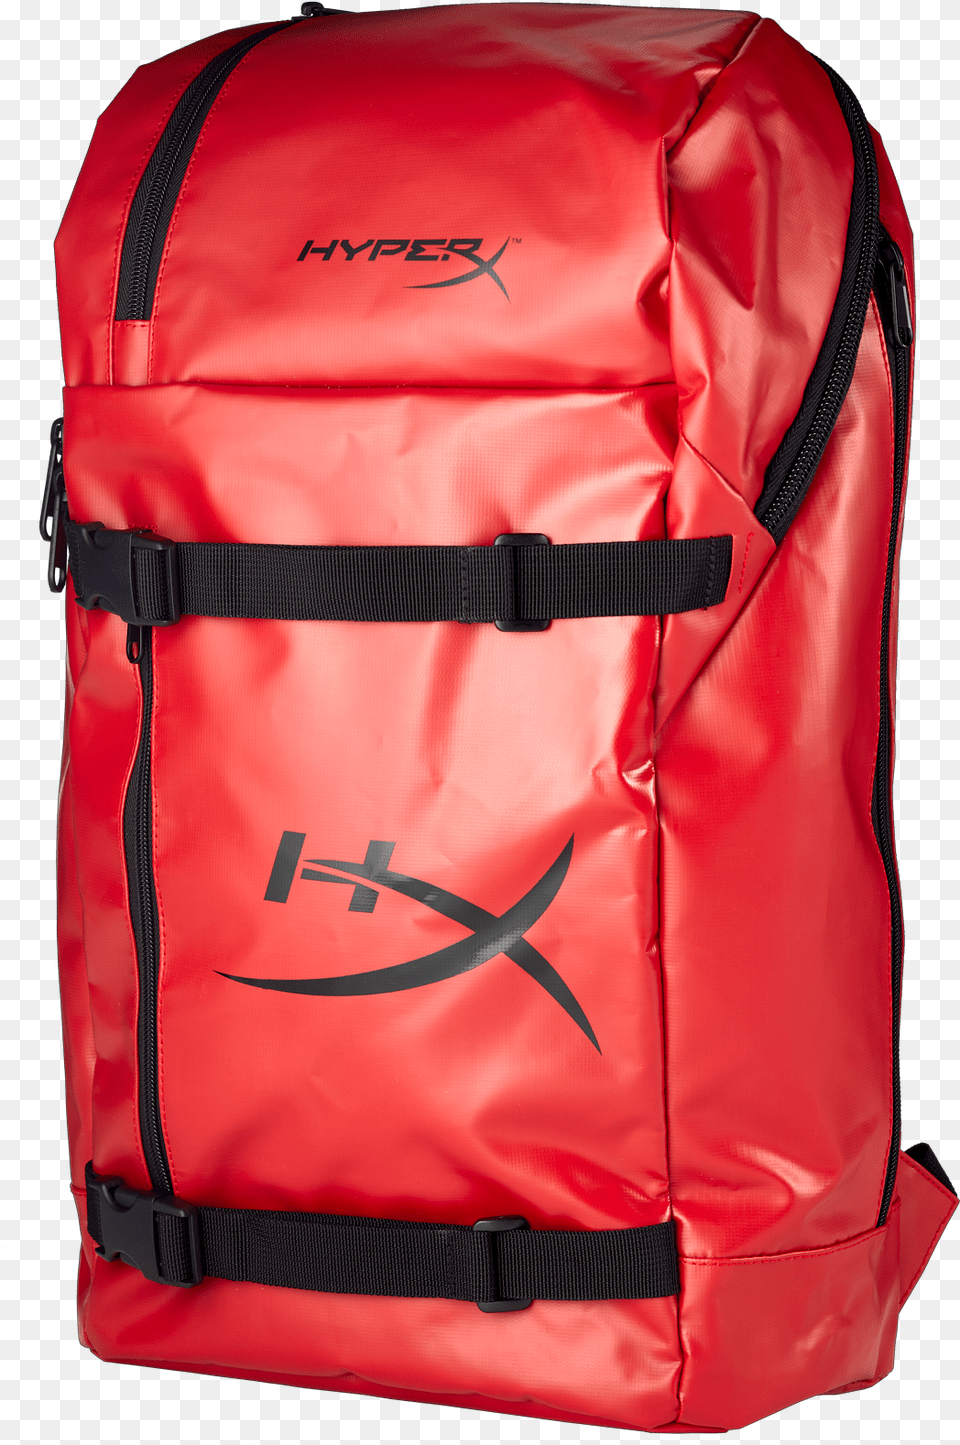 Hyperx Gaming Bag Scout Red, Backpack Png